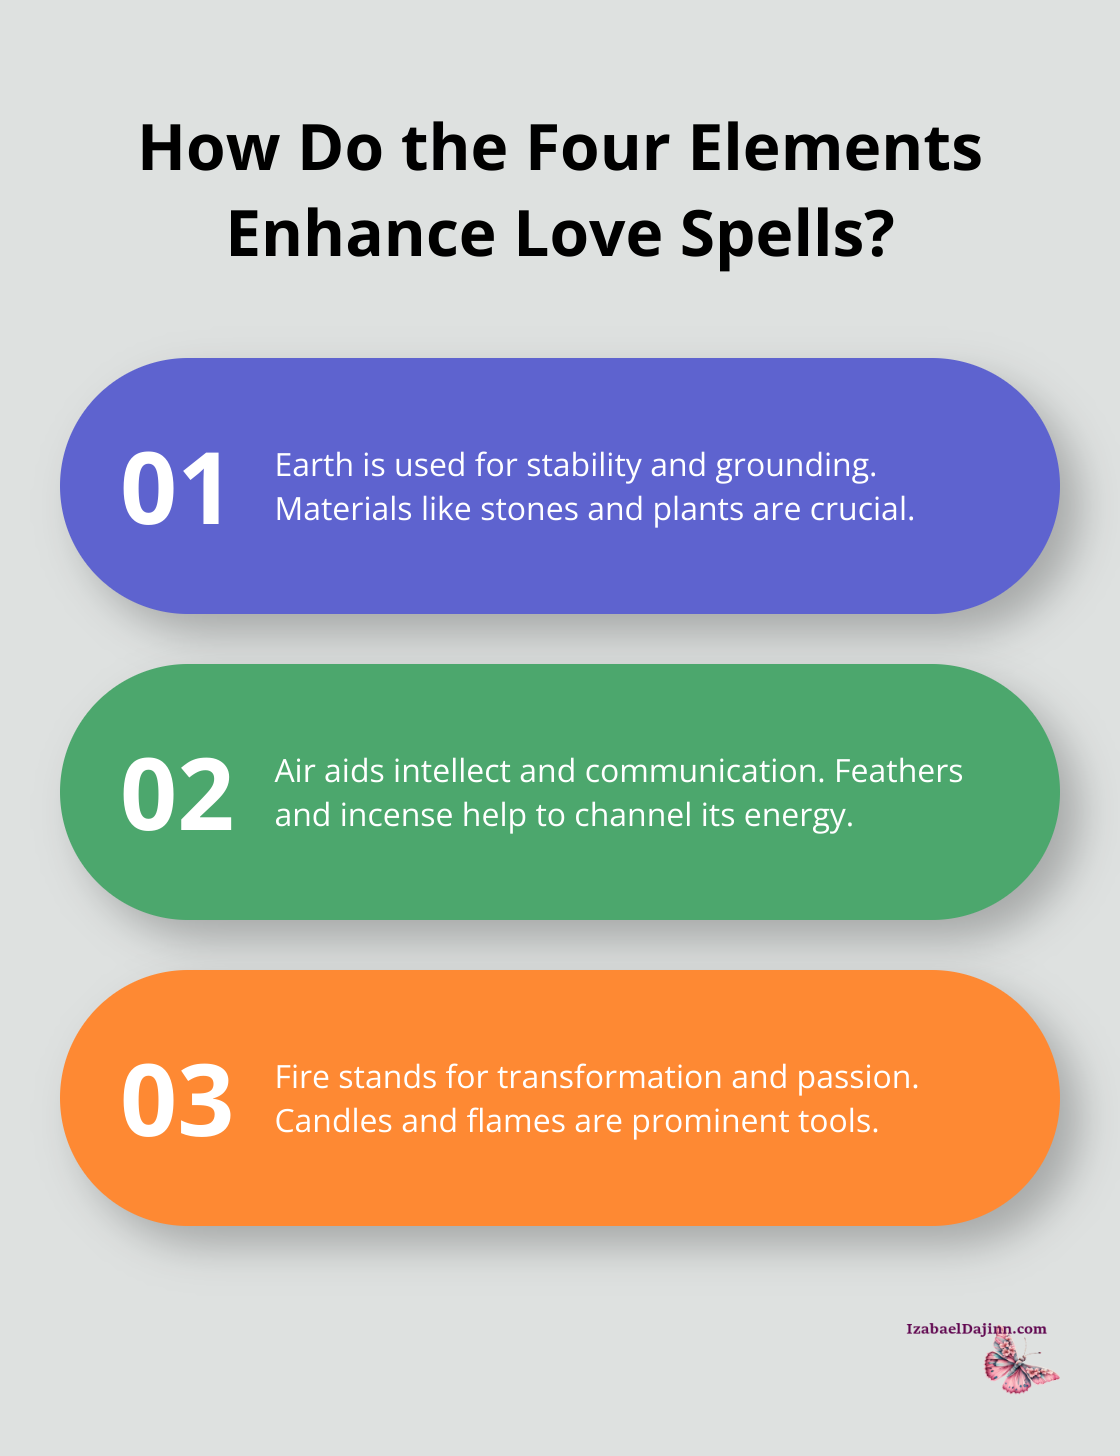 Fact - How Do the Four Elements Enhance Love Spells?